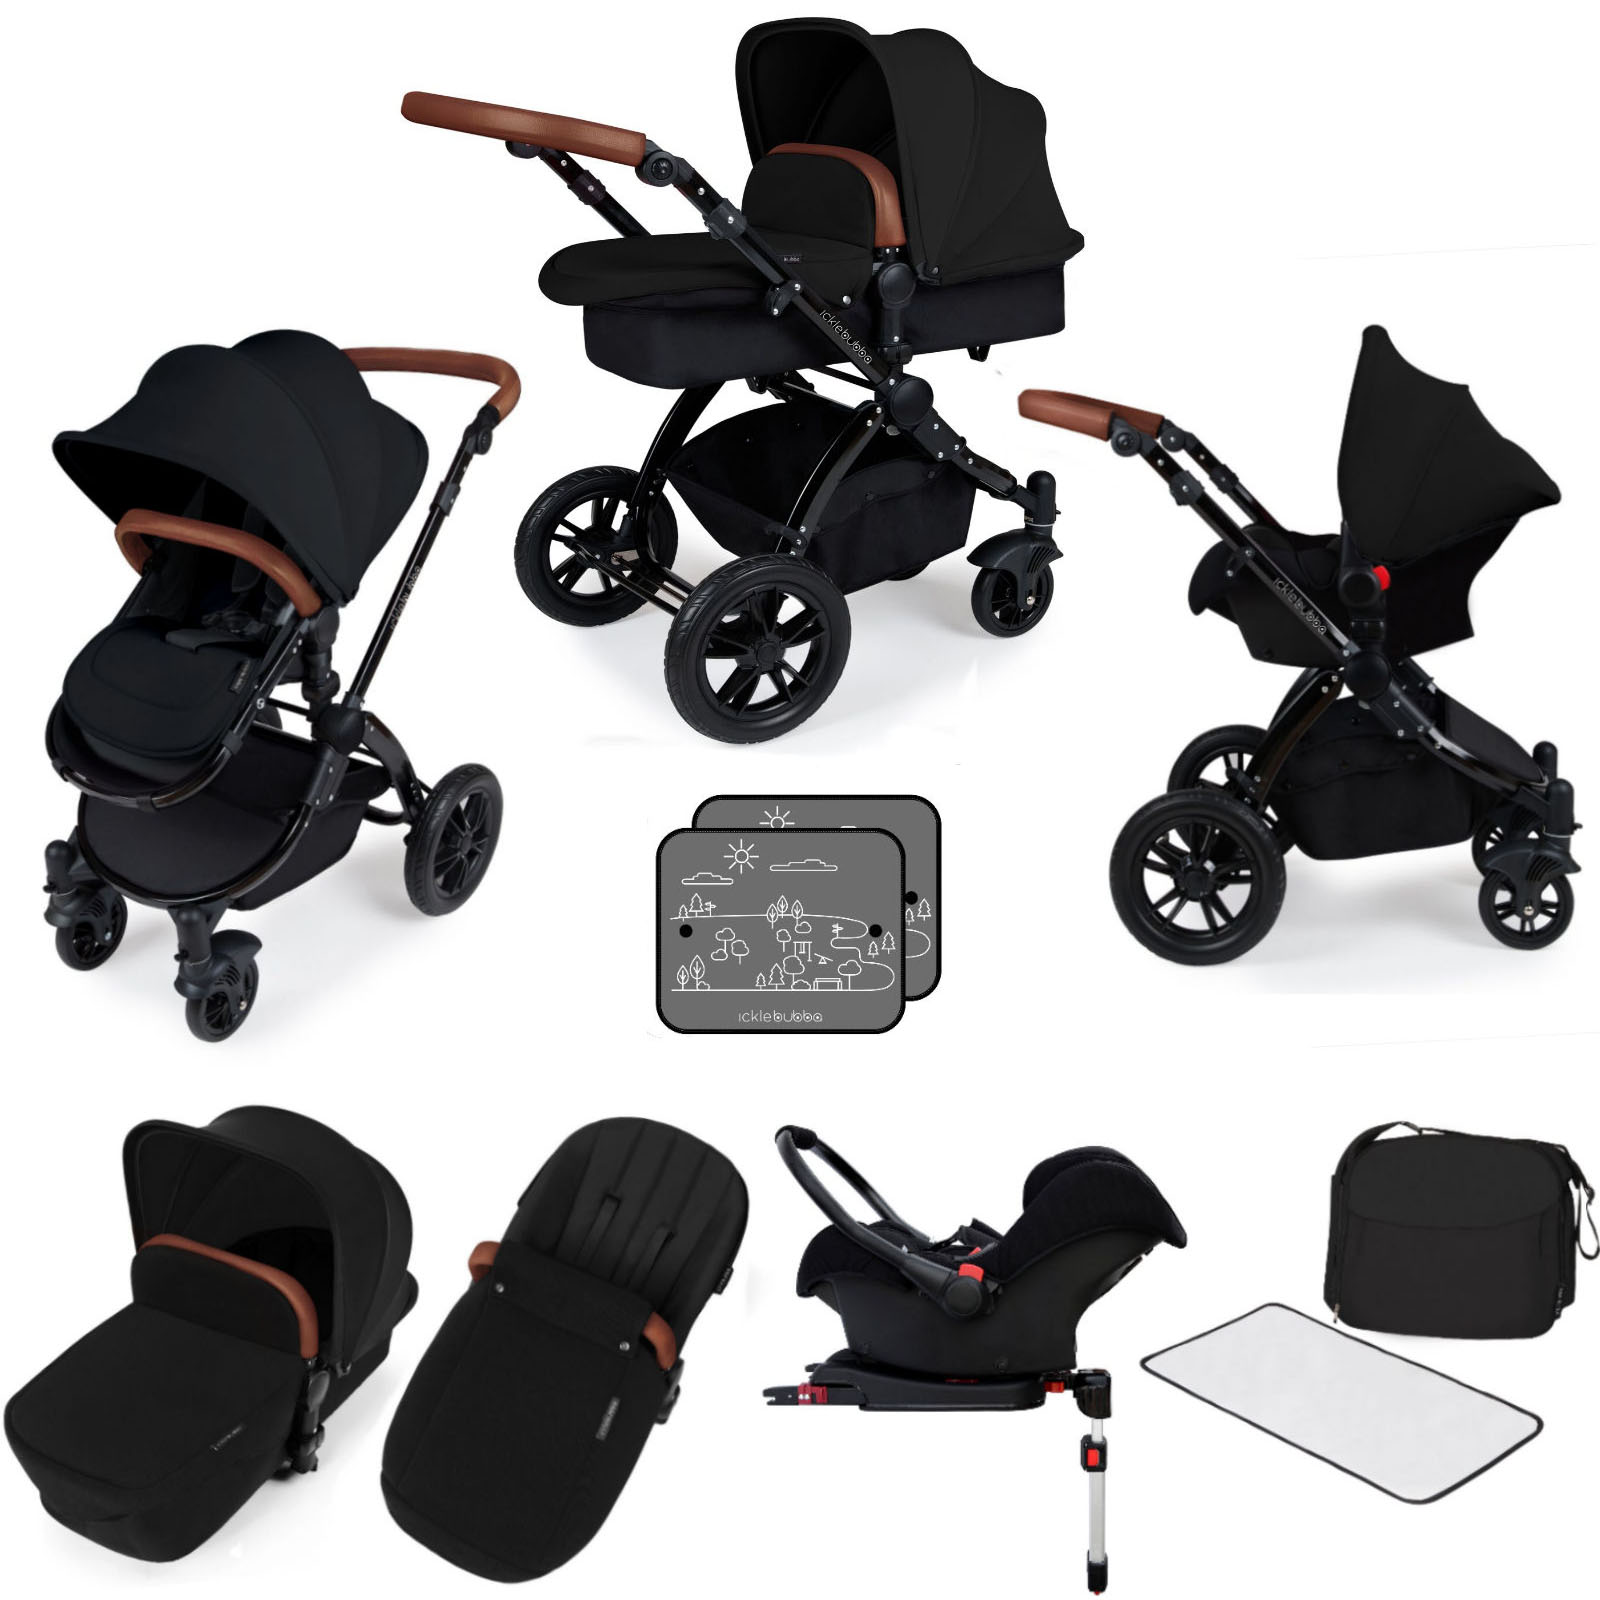 Ickle bubba Stomp V3 Black All In One Travel System & ISOFIX Base - Black